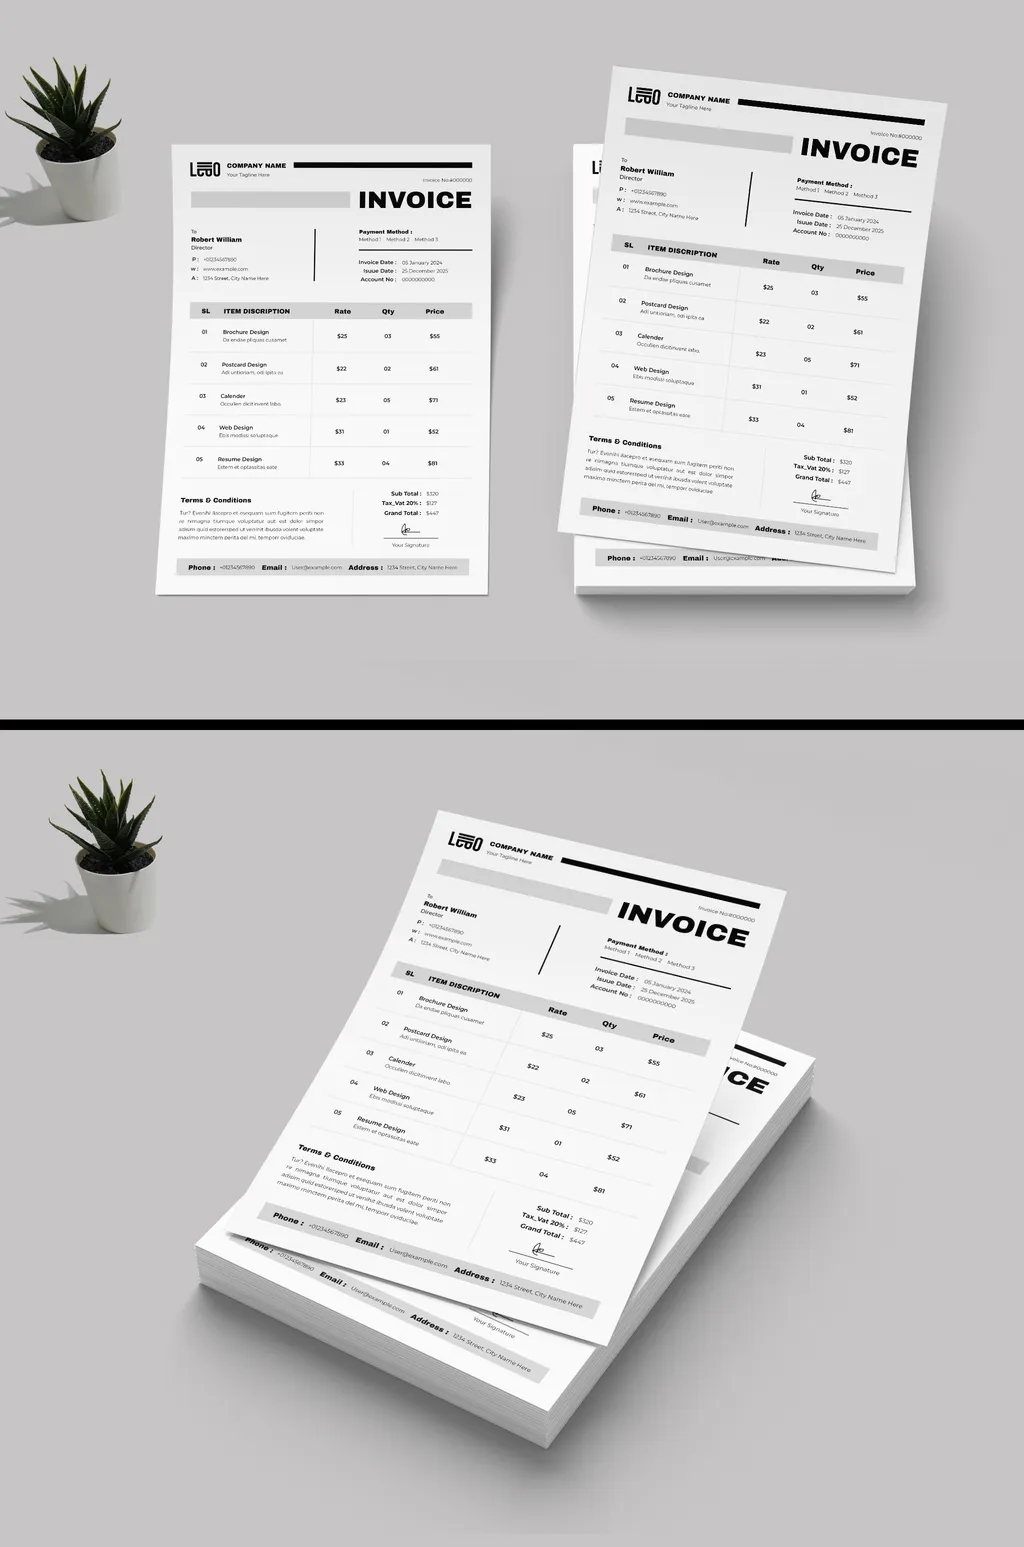 Adobestock - Business Invoice Template Layout 738487344